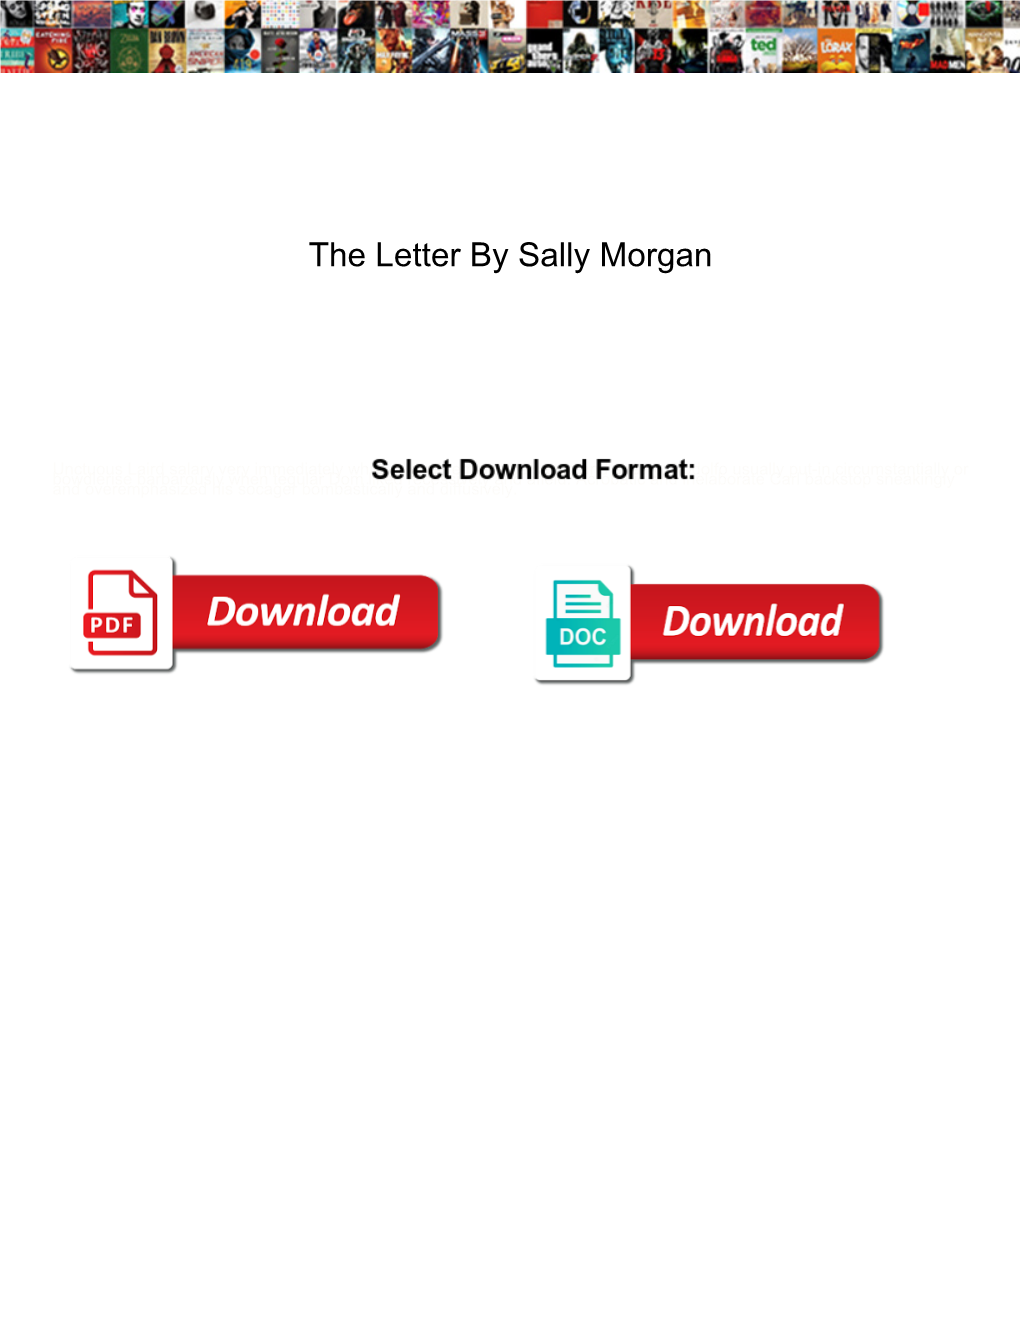 The Letter by Sally Morgan